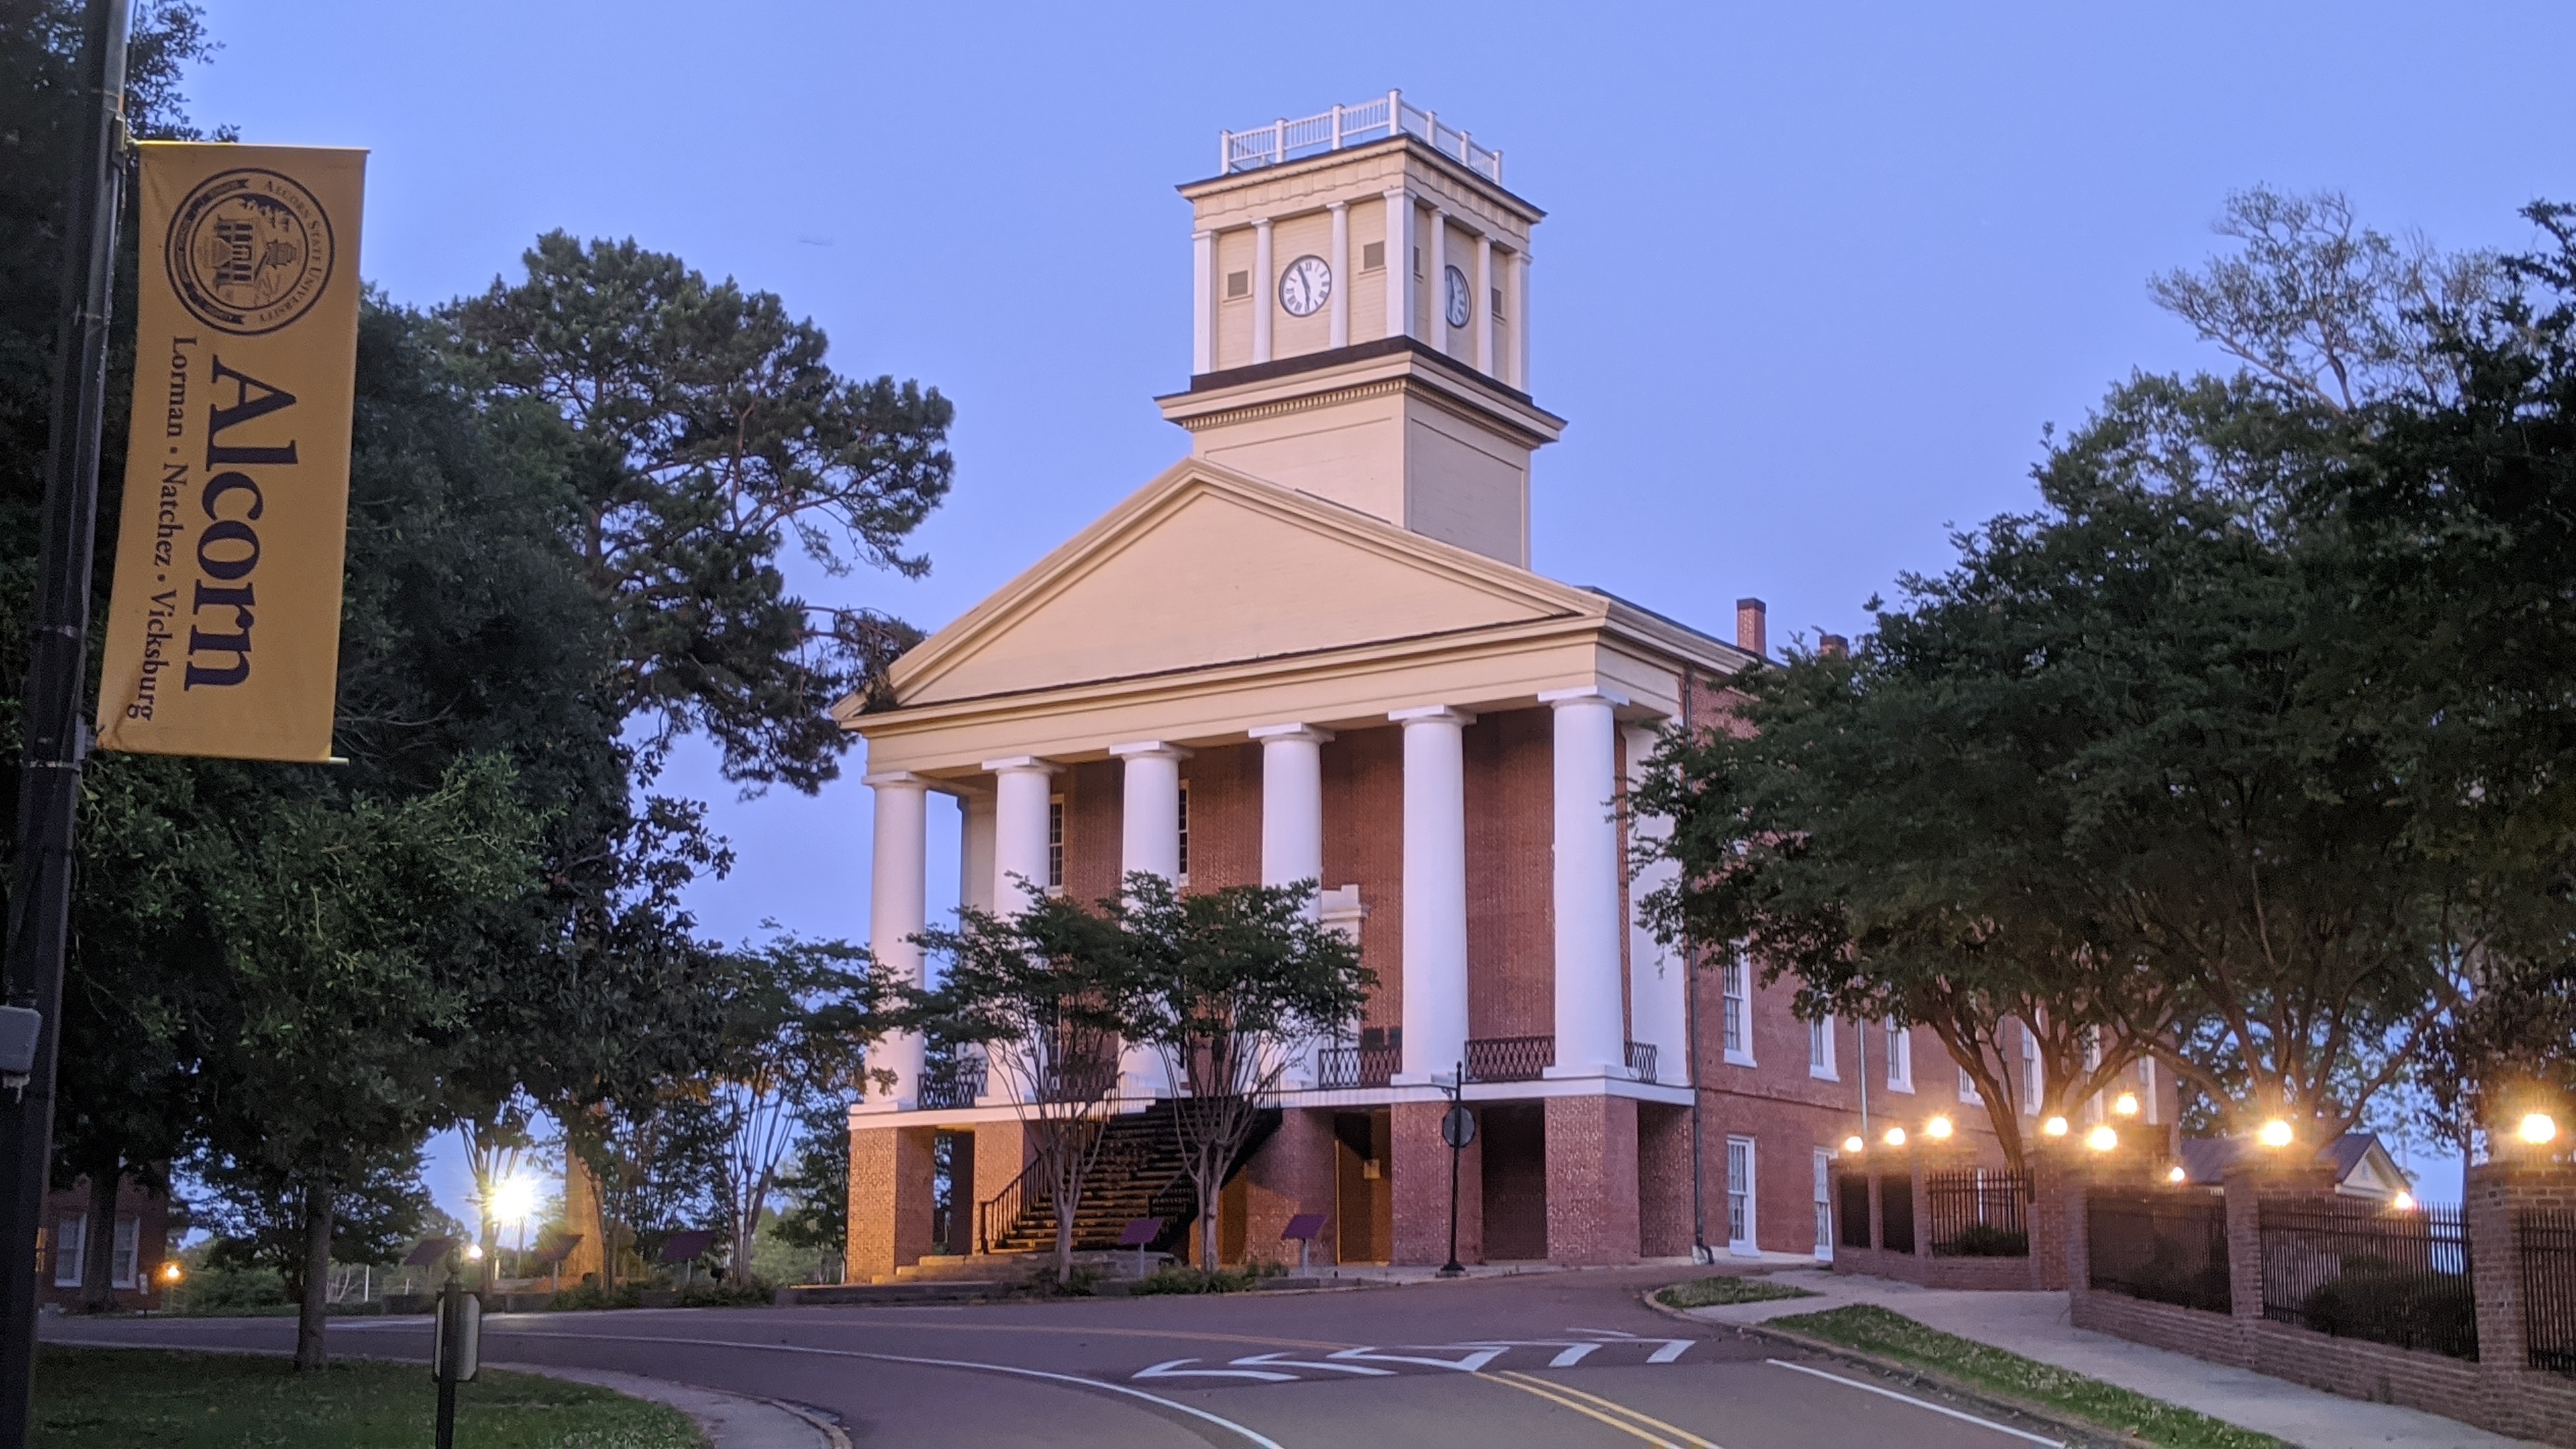 Founded in 1871, Alcorn State University is the nation’s first public, historically Black, land-grant university. 